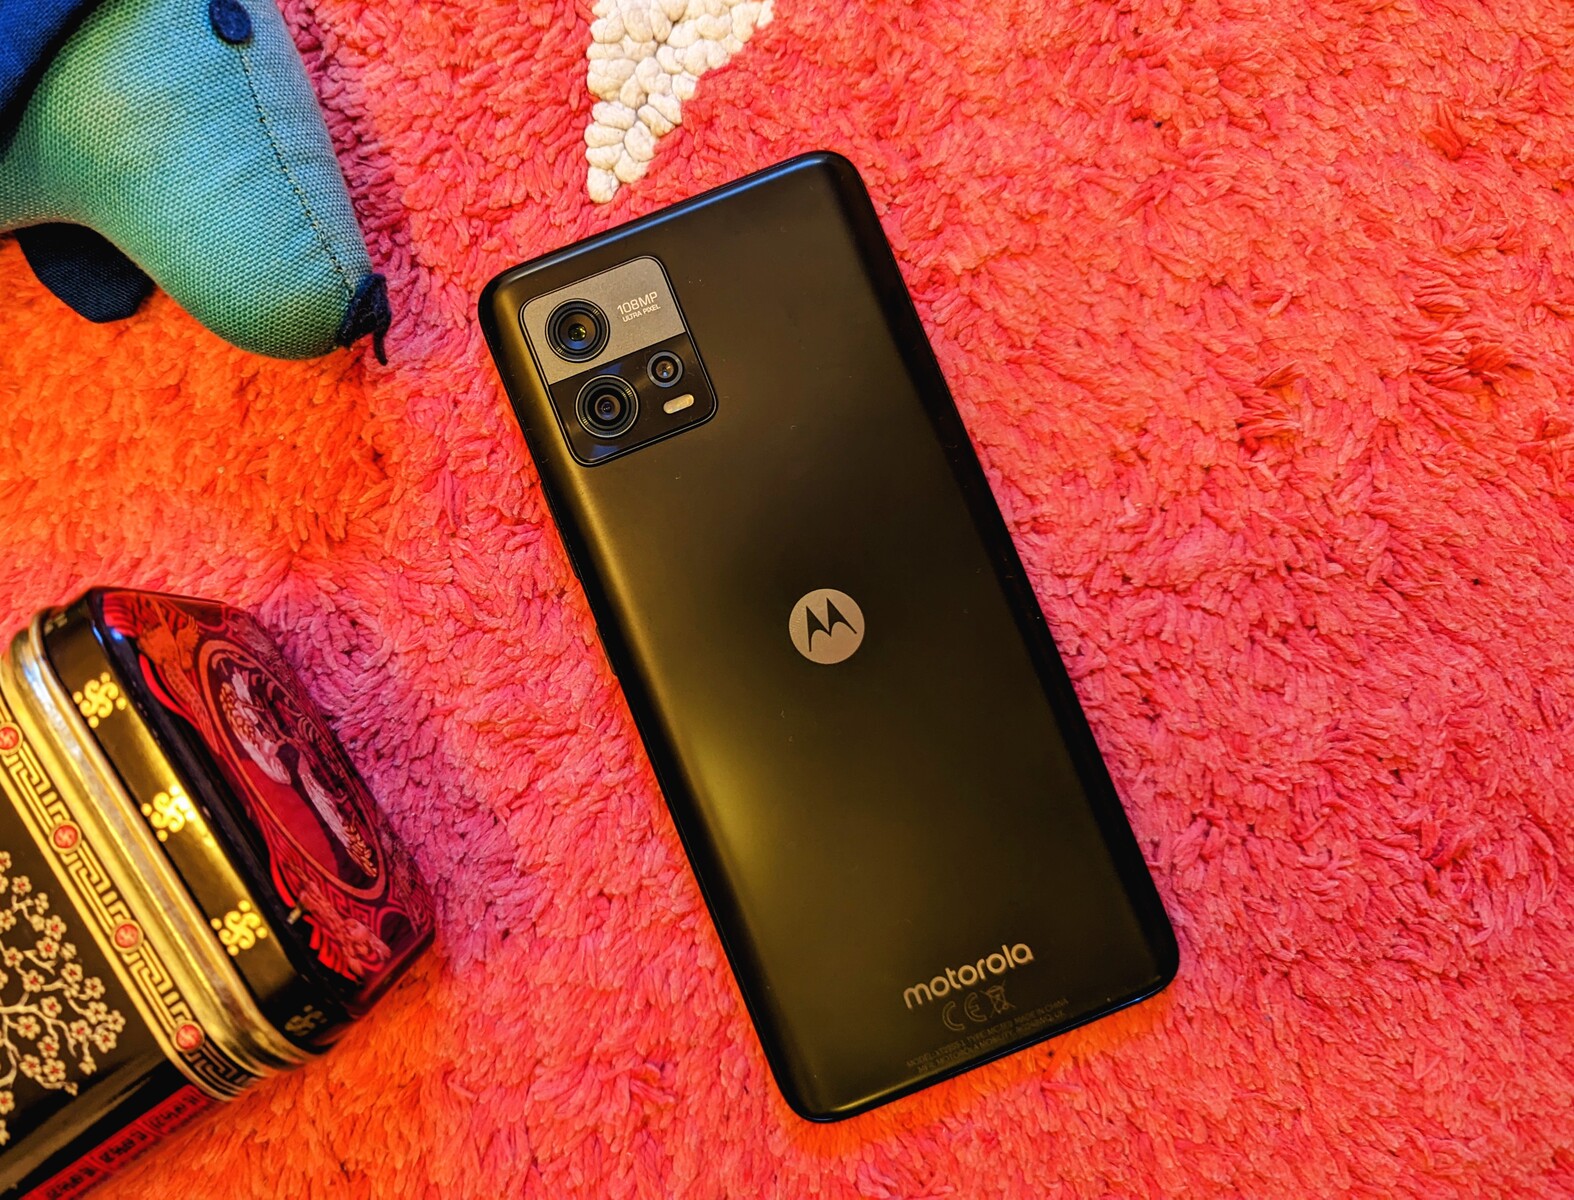 Moto E4 Plus and Moto E4 Hands on review and First Impression